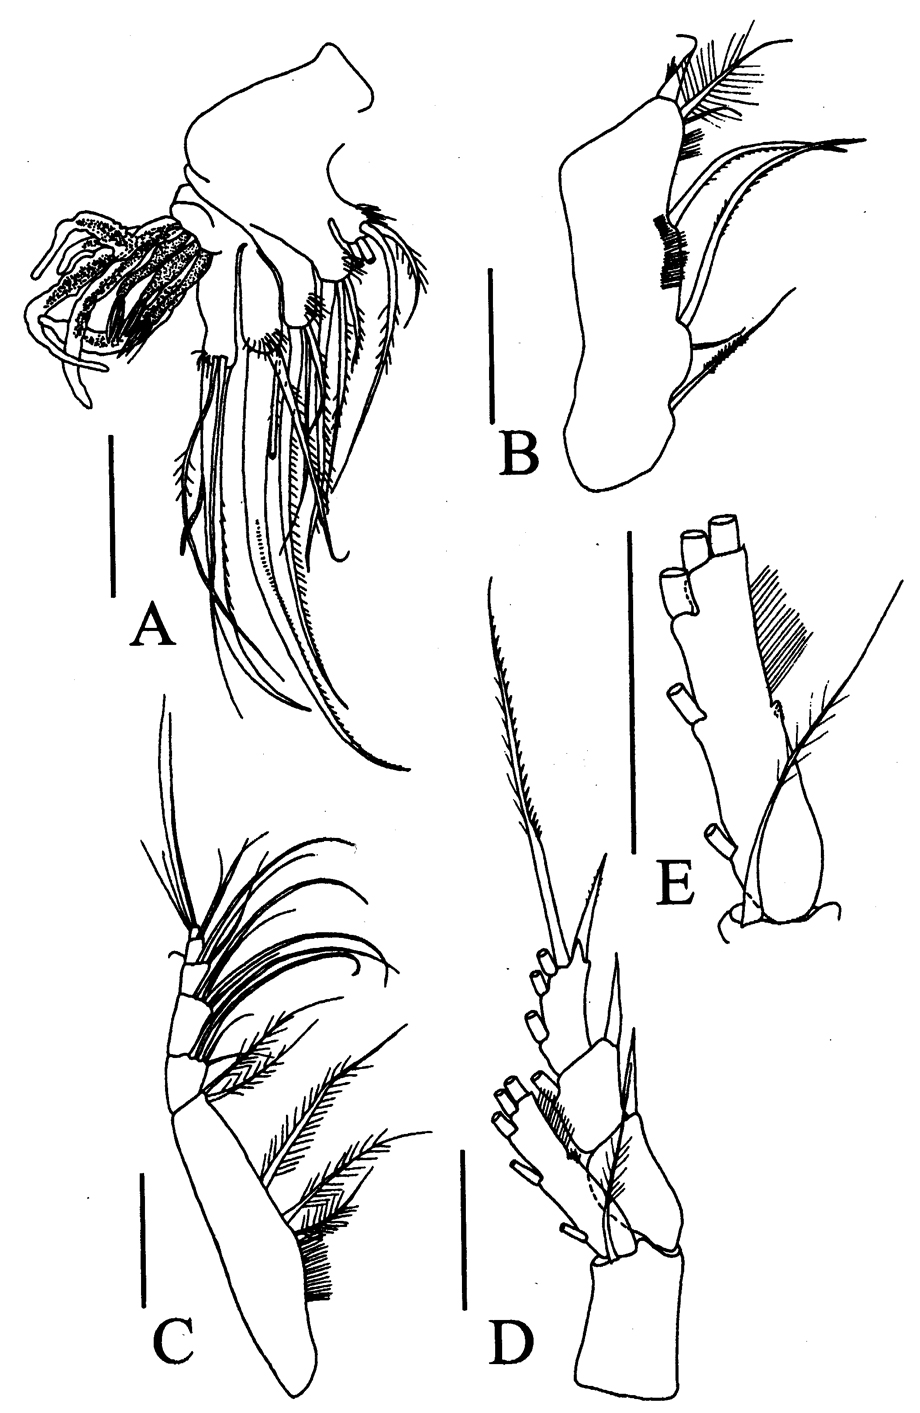 Species Omorius atypicus - Plate 3 of morphological figures